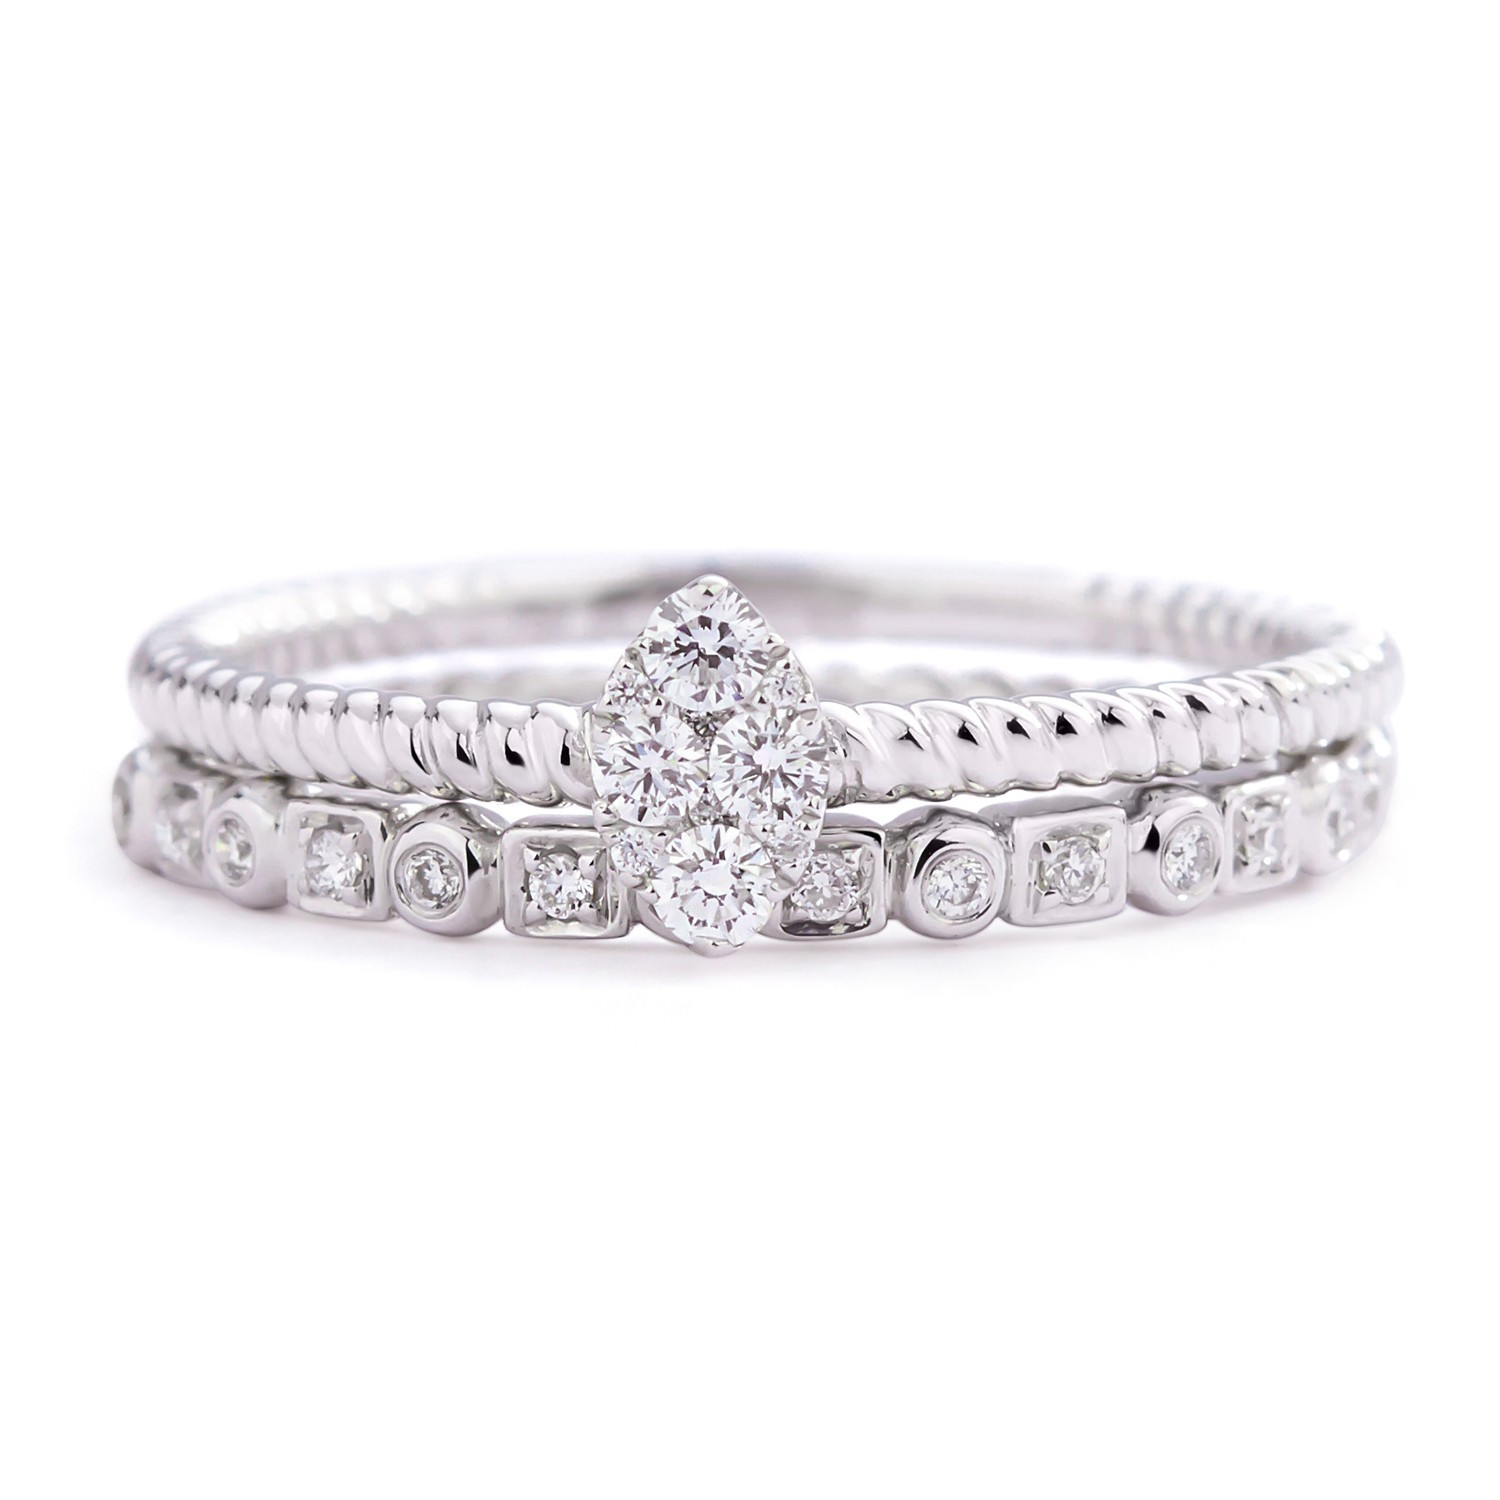 Diamond Stackable Rings
 Alternating Square & Circle Diamond Stackable Ring in 18k